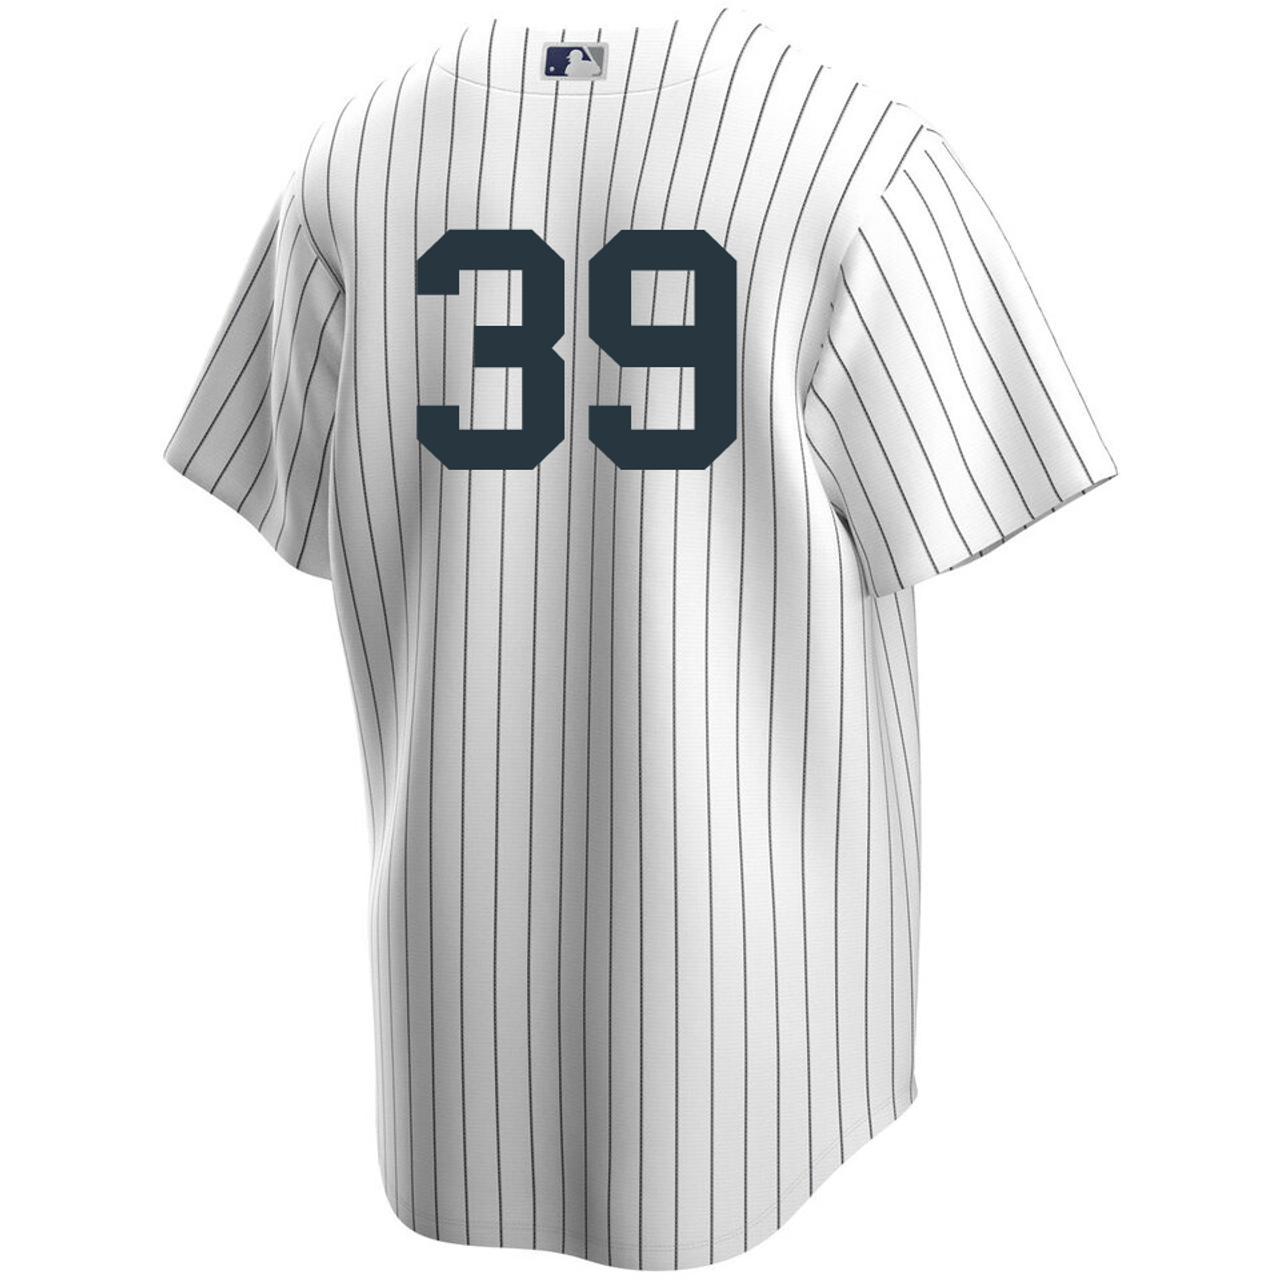 Harrison Bader New York Yankees Home Player Jersey by Majestic